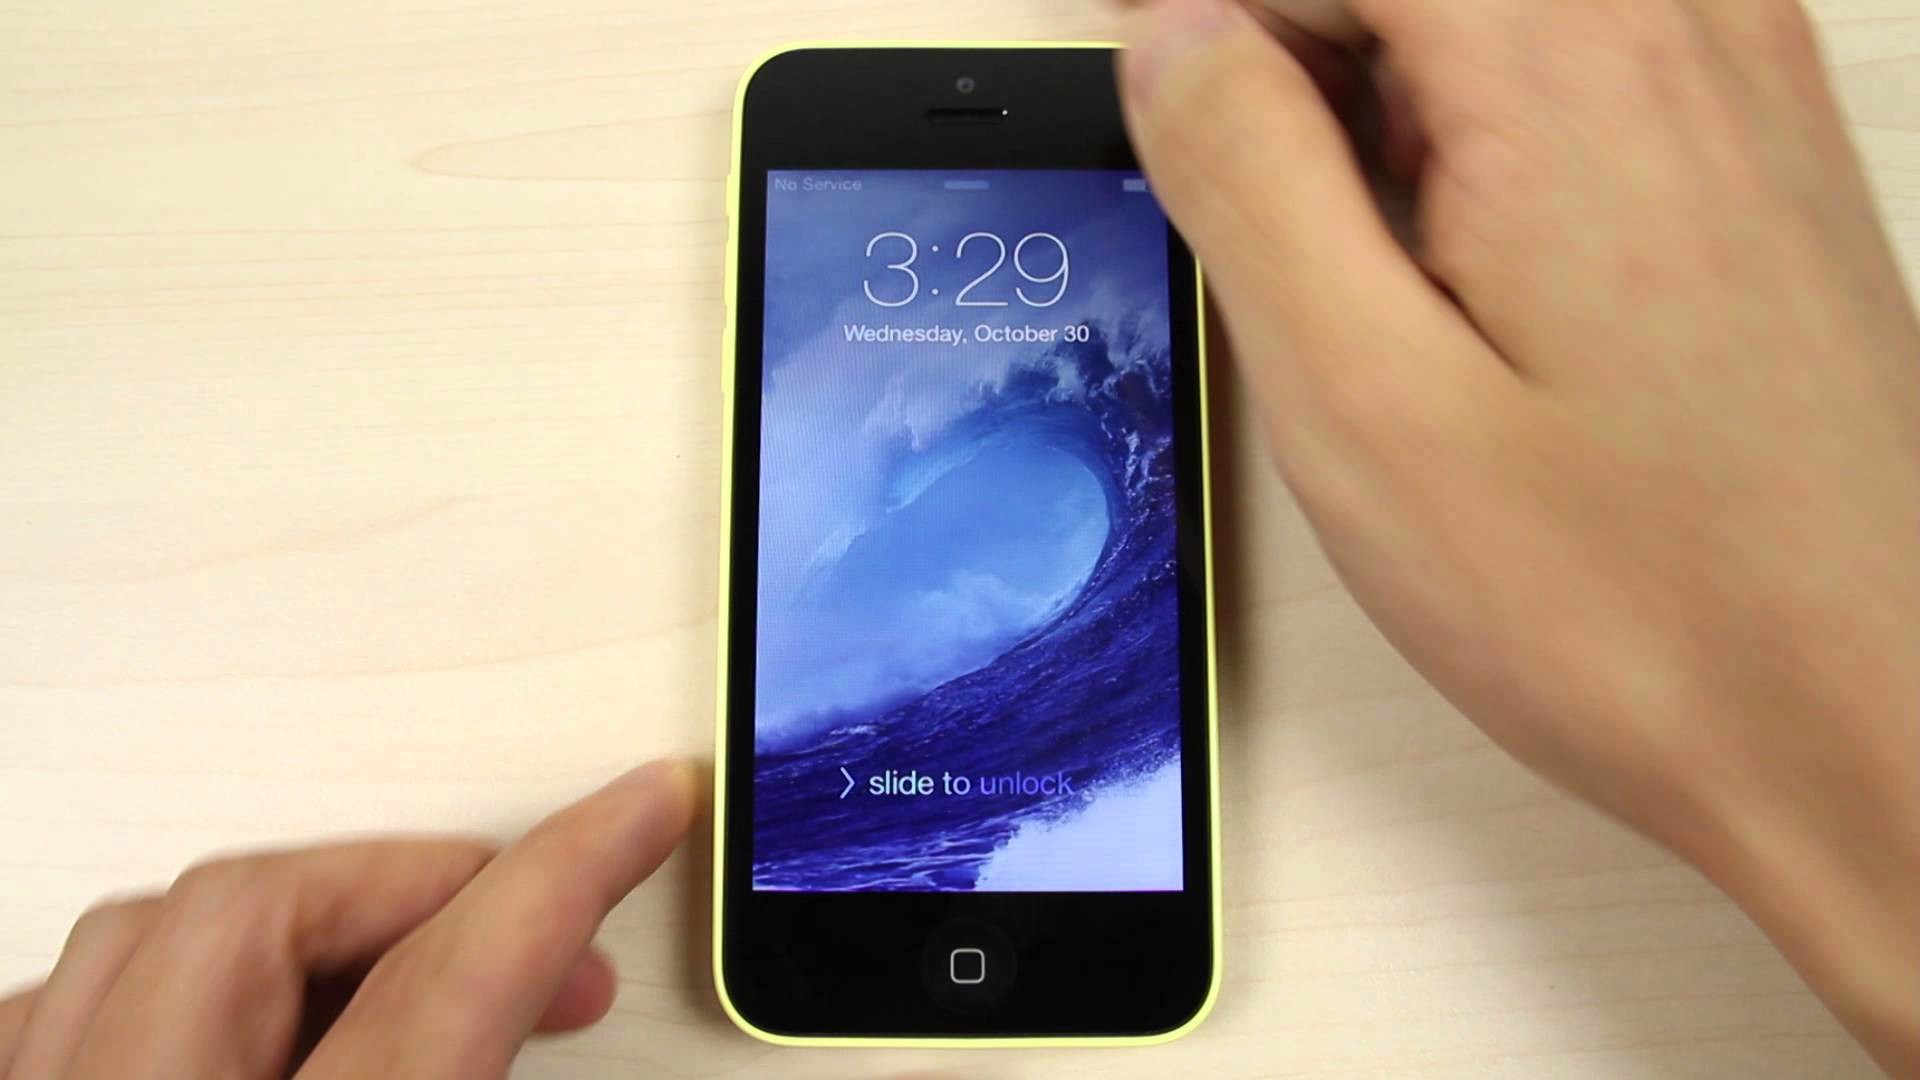 1920x1080 How to change the home screen and lock screen wallpaper on Apple iPhone 5C  - YouTube